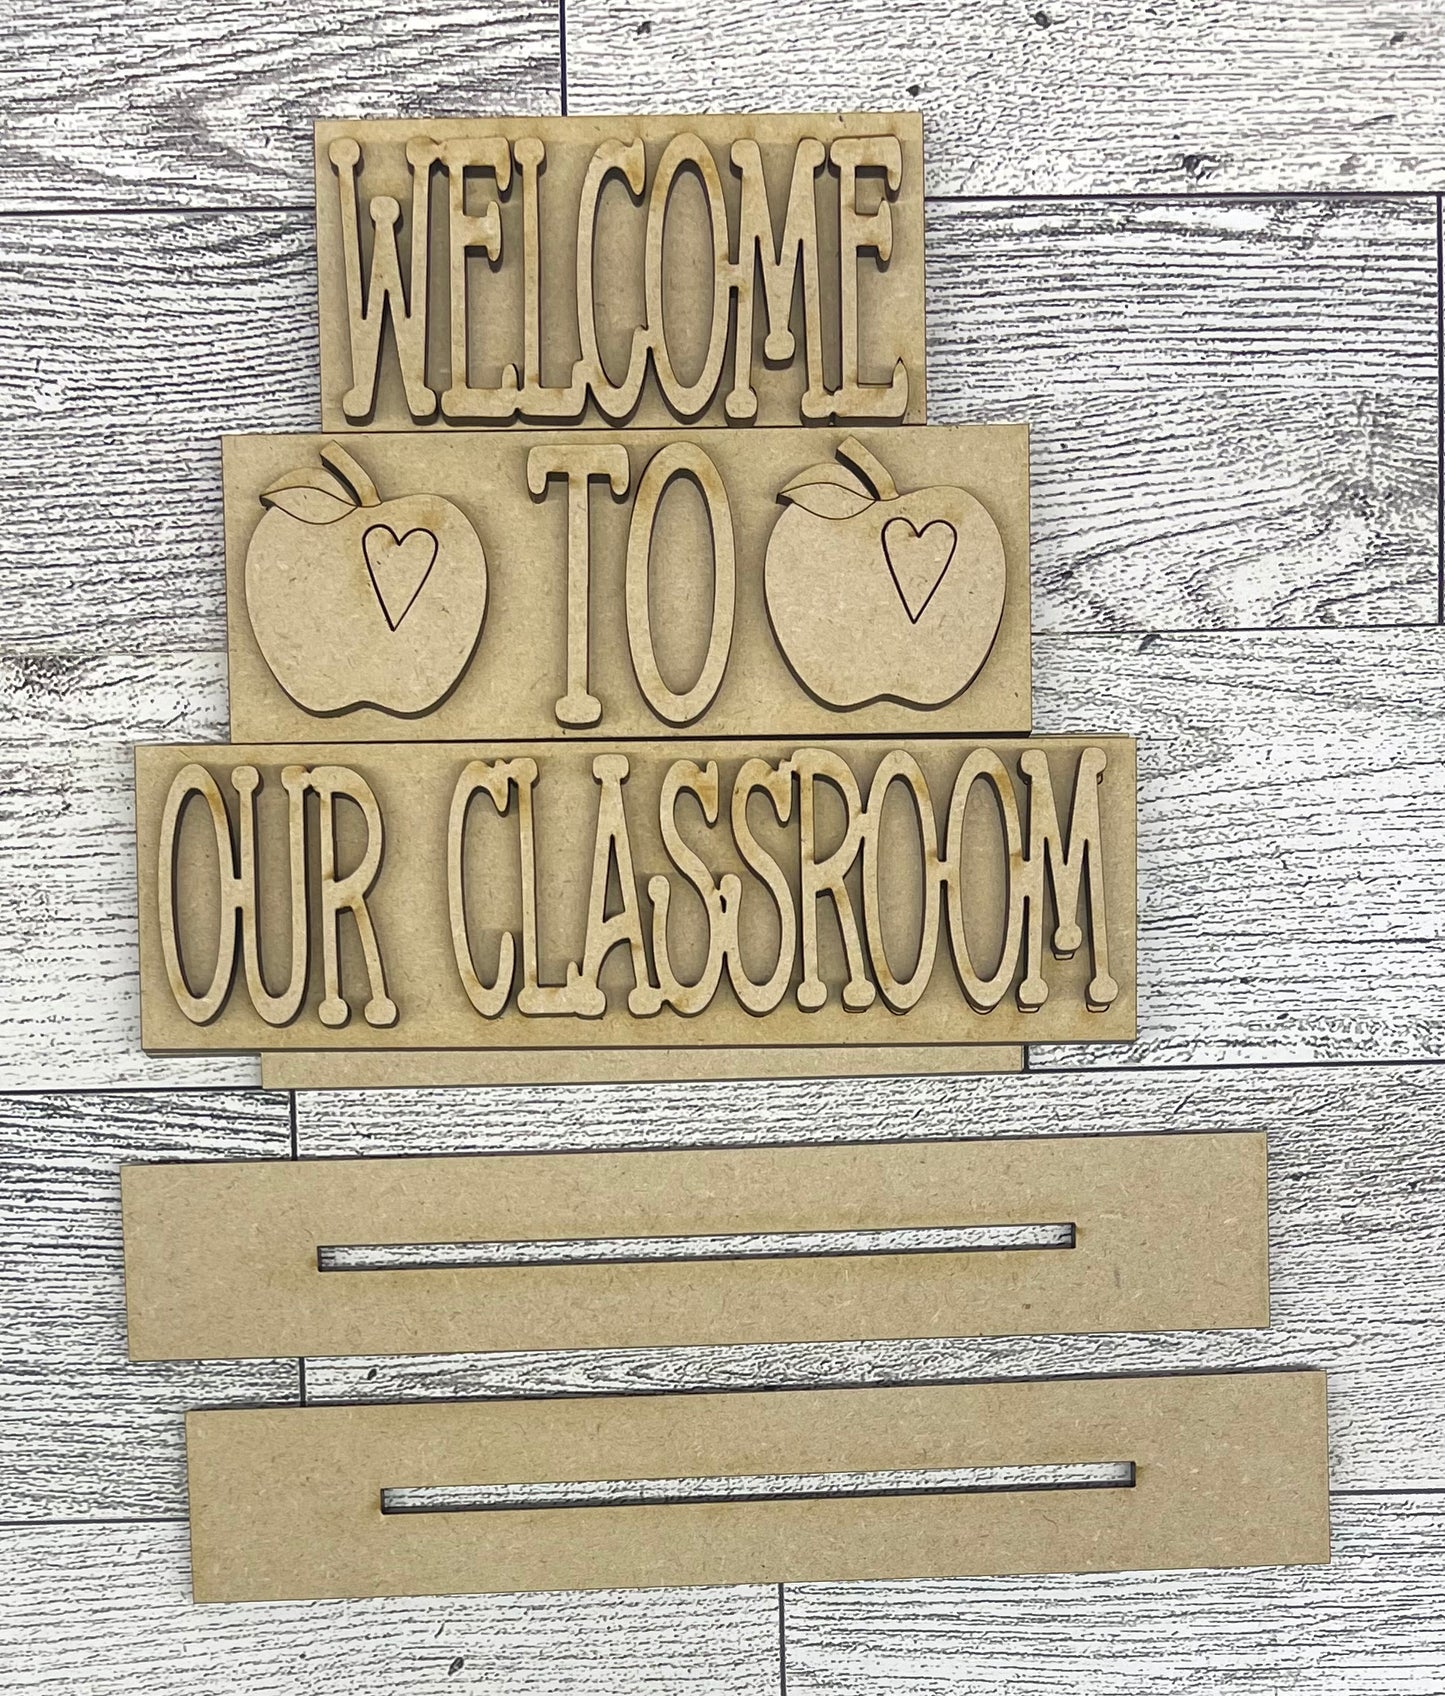 Teacher word stacker kits - wood pieces, unpainted wood cutouts, ready for you to paint, scrapbook paper is not included  lol